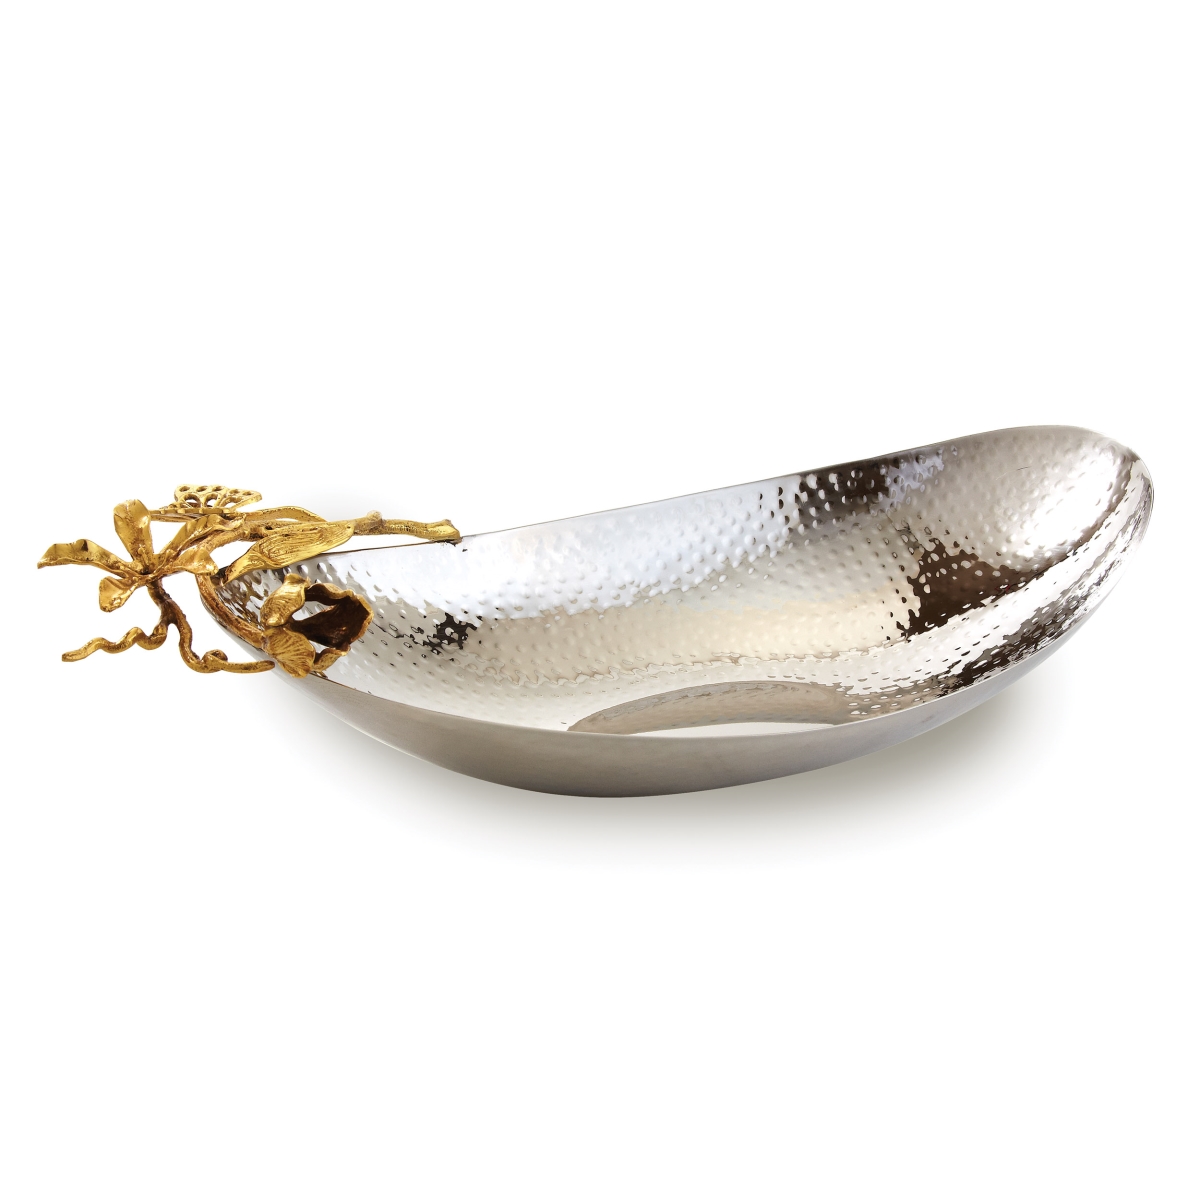 70072 14 X 8 X 3.5 In. Butterfly Boat Shape Serving Bowl, Silver & Gold